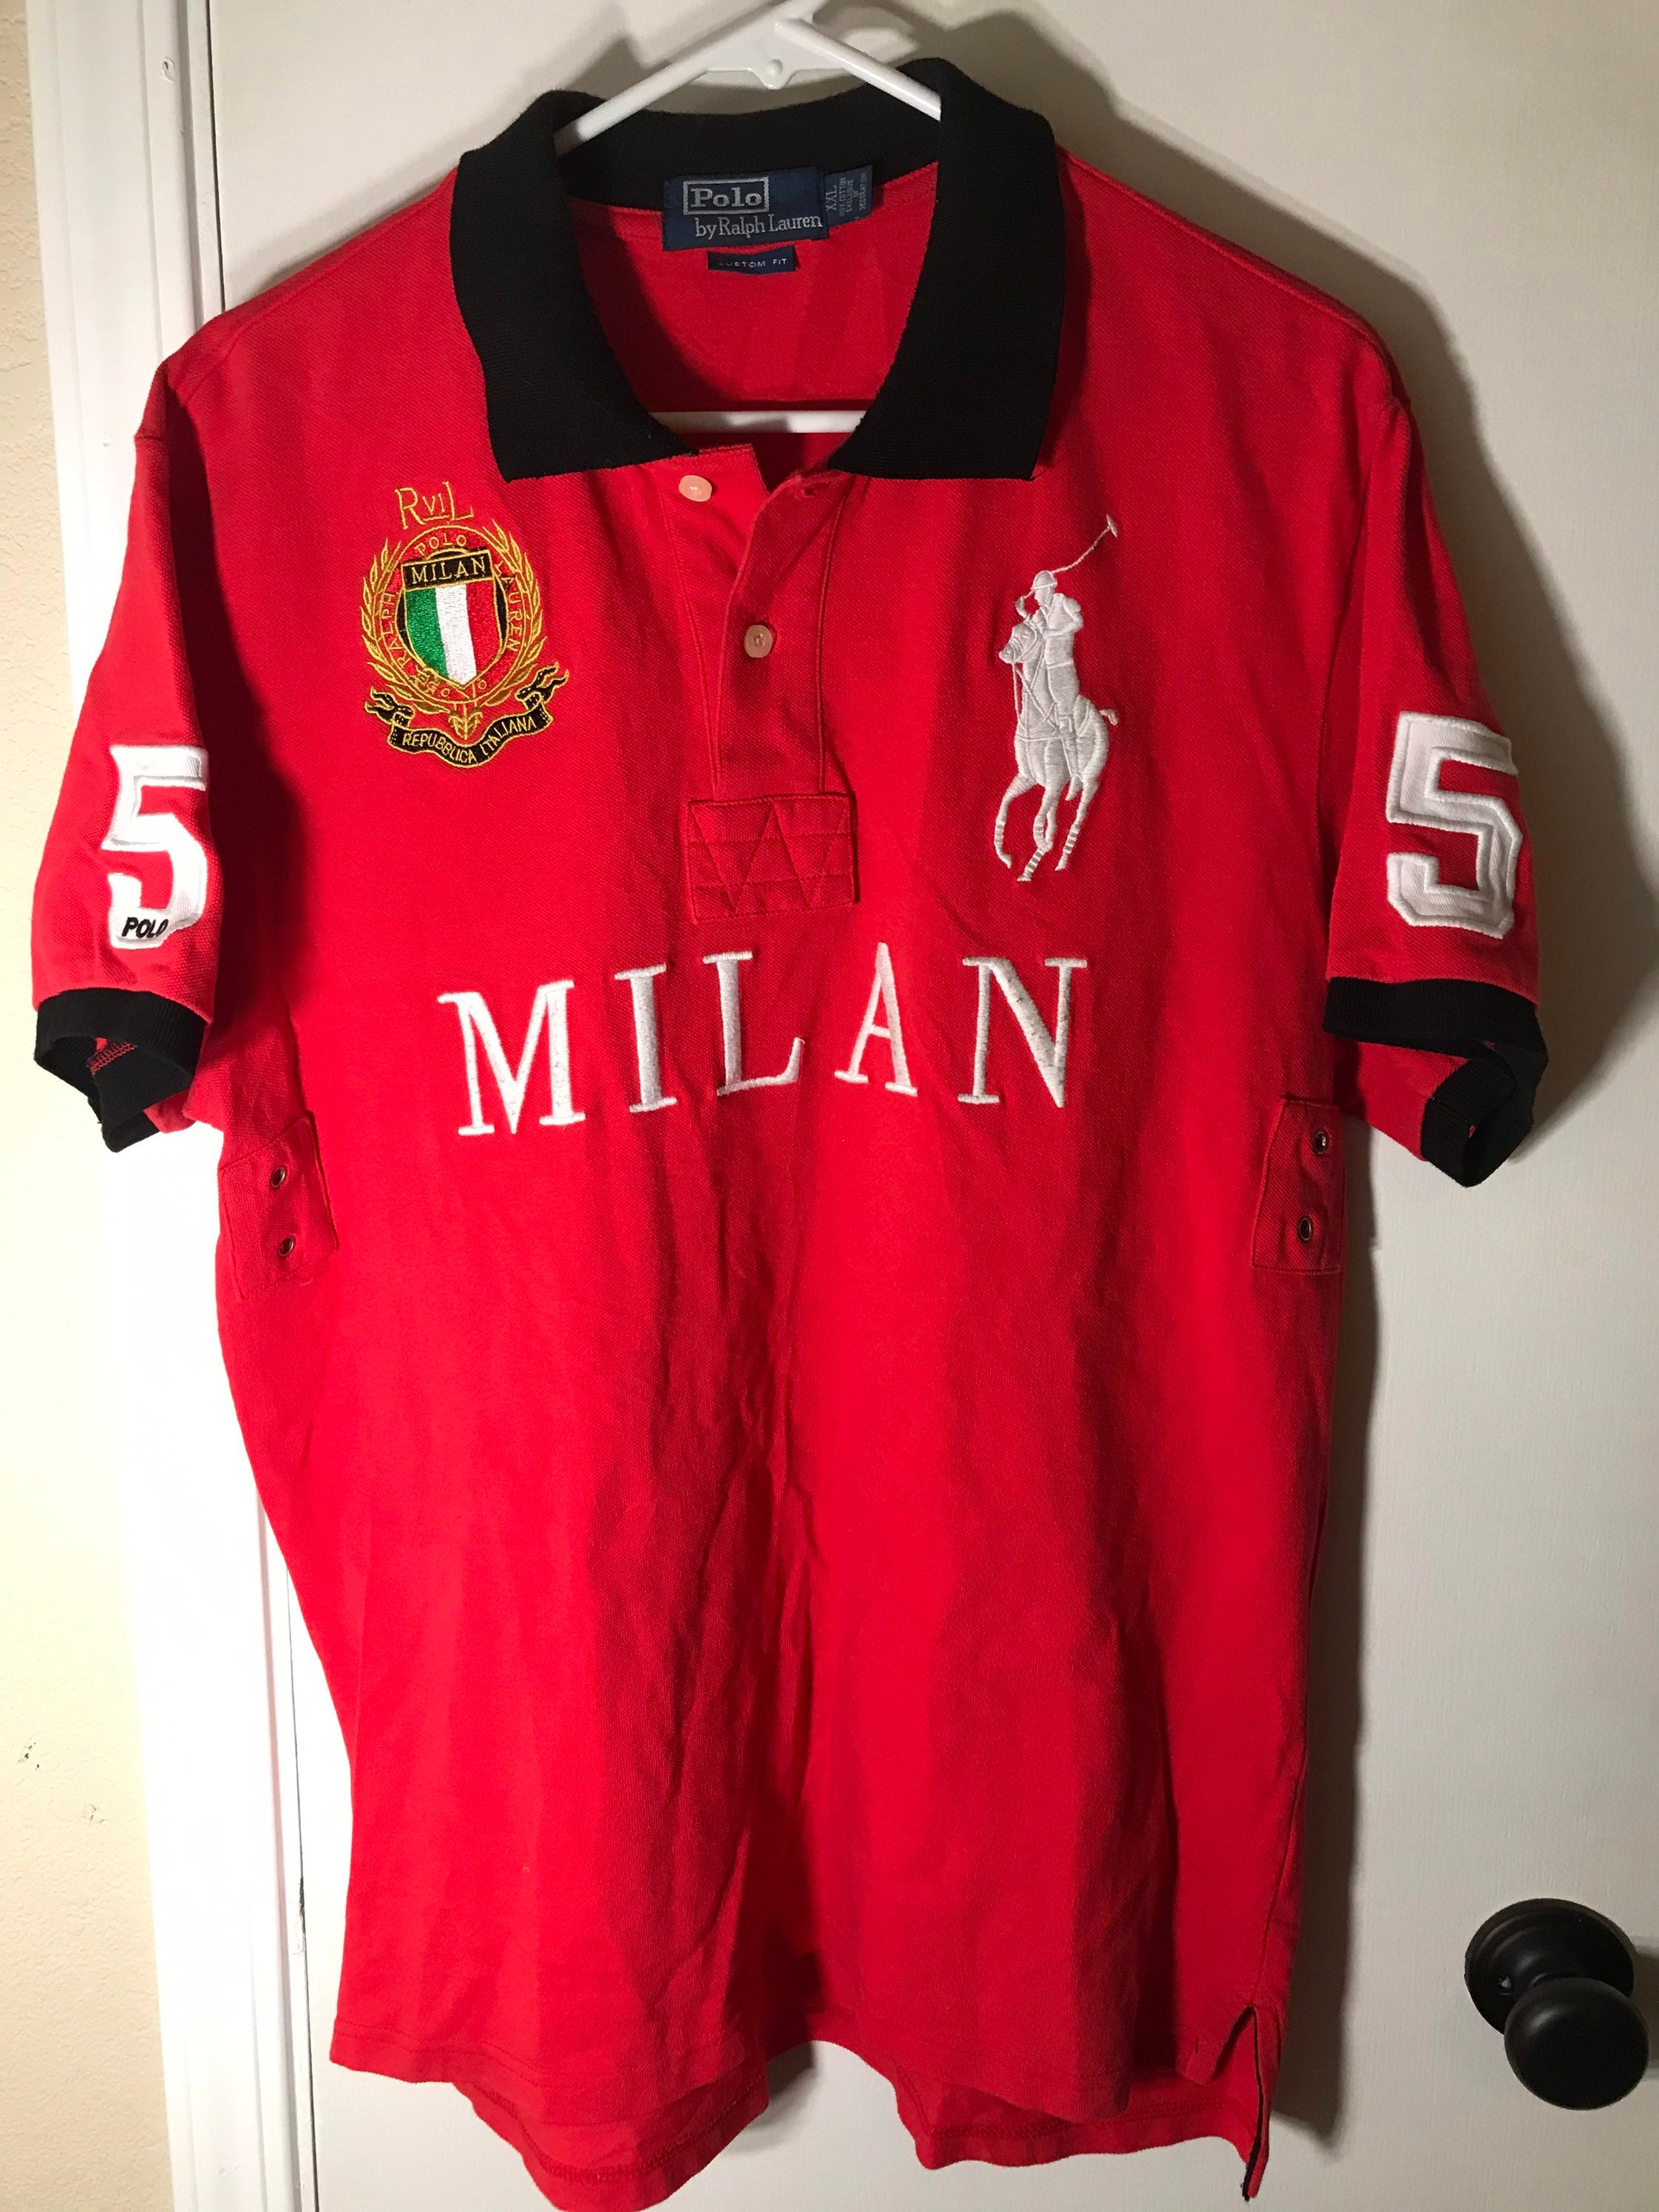 Polo Ralph Lauren MILAN Italy Big Pony Custom Fit Cotton Rugby - Etsy